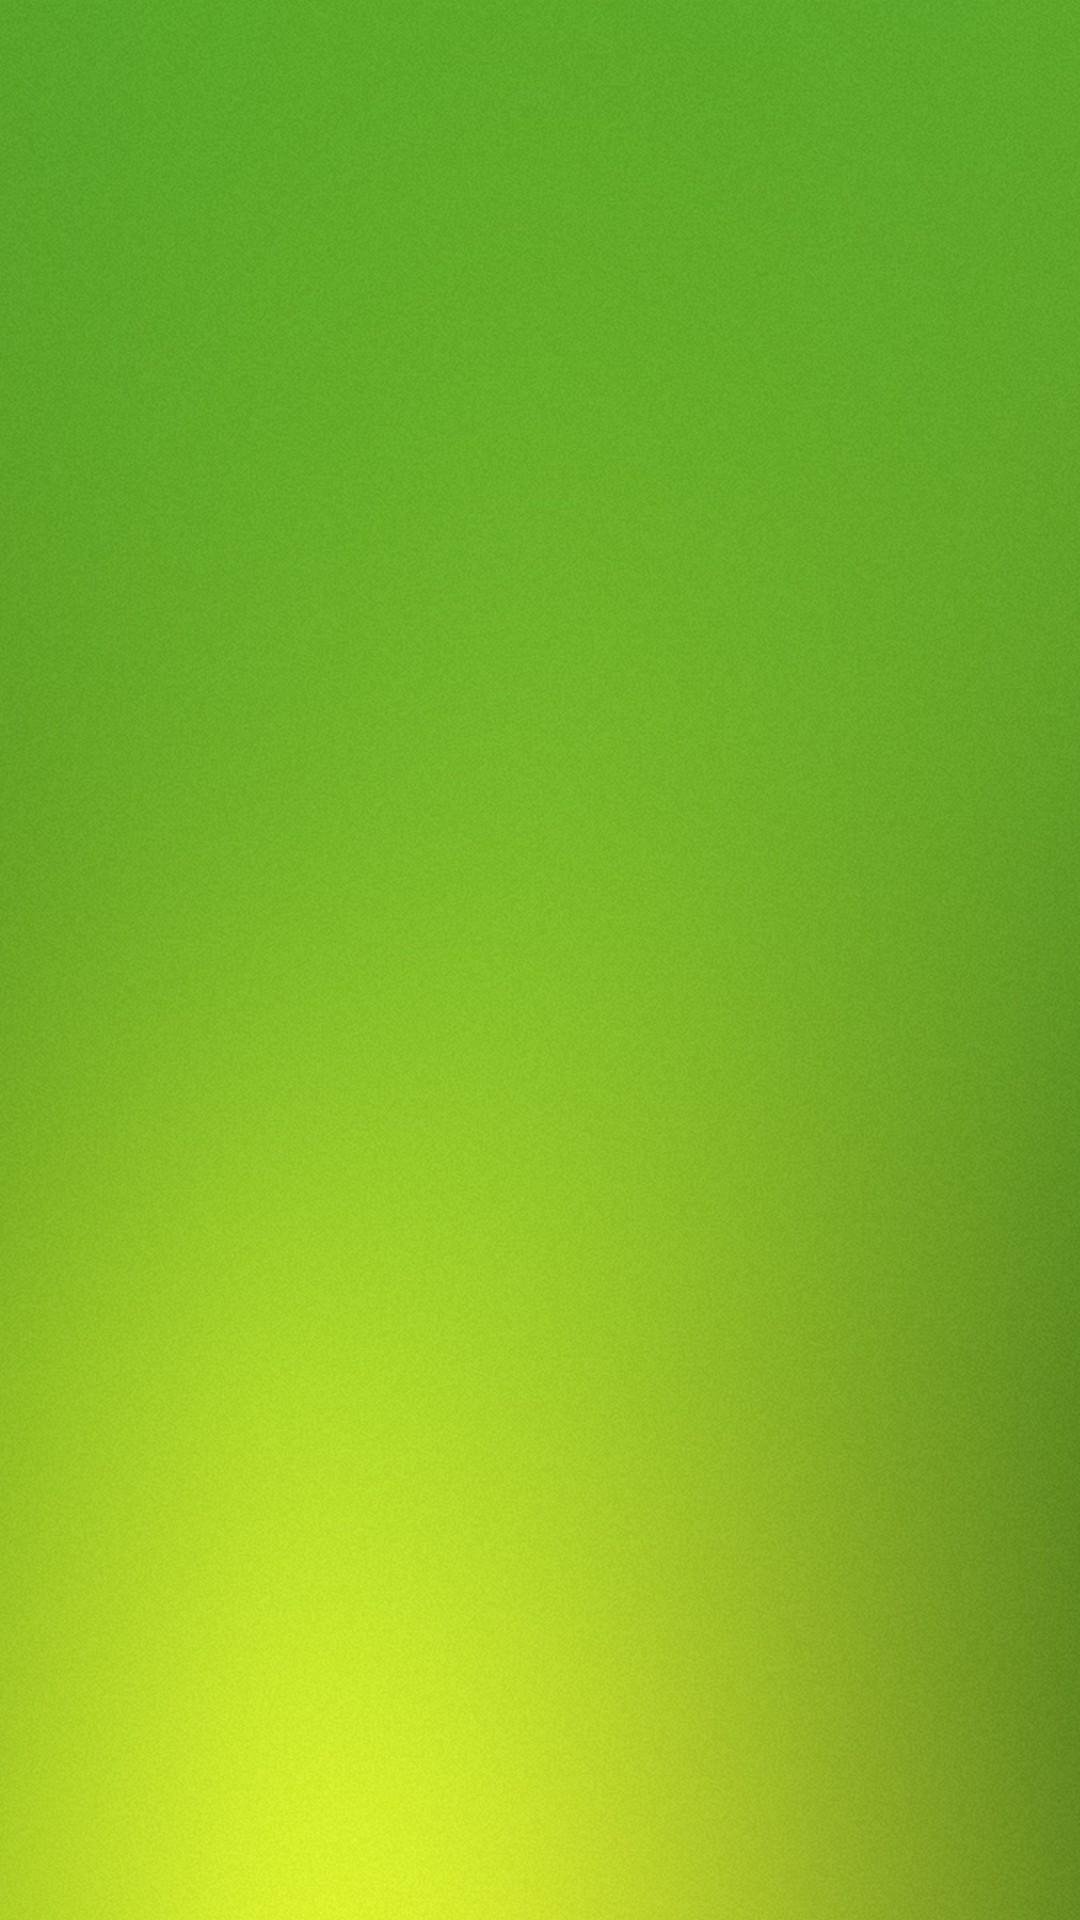 Green Yellow Blur Gradation iPhone X Wallpapers Free Download